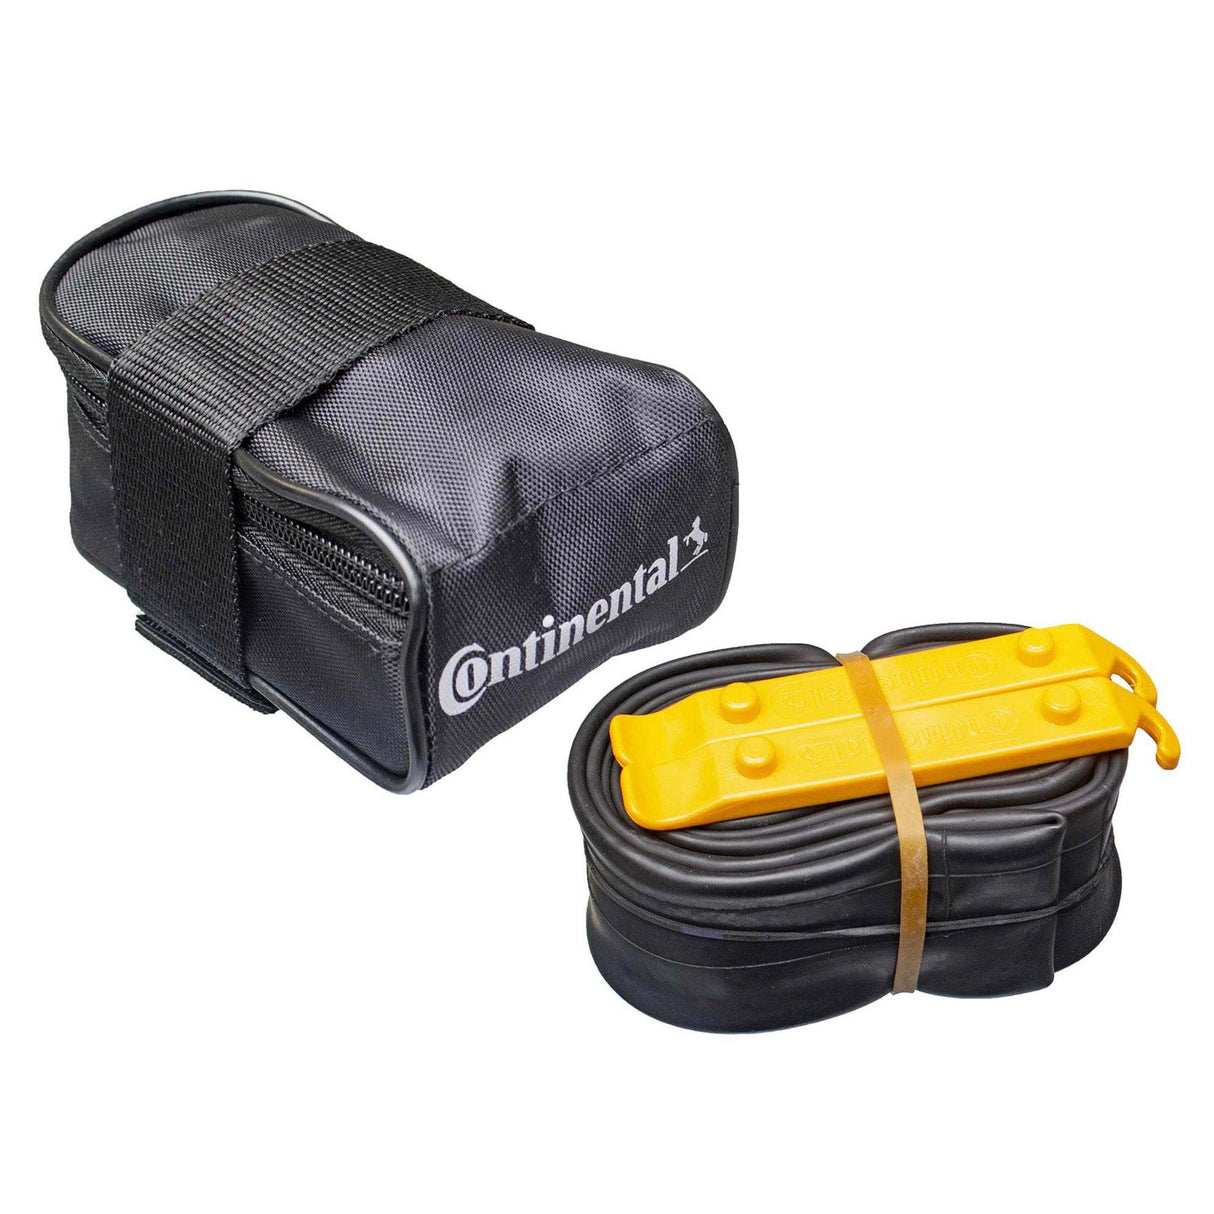 Continental Mtb Saddle Bag With Mtb 29 X 1.75X2.5 Presta 42Mm Valve Tube And 2 Tyre Levers: Black